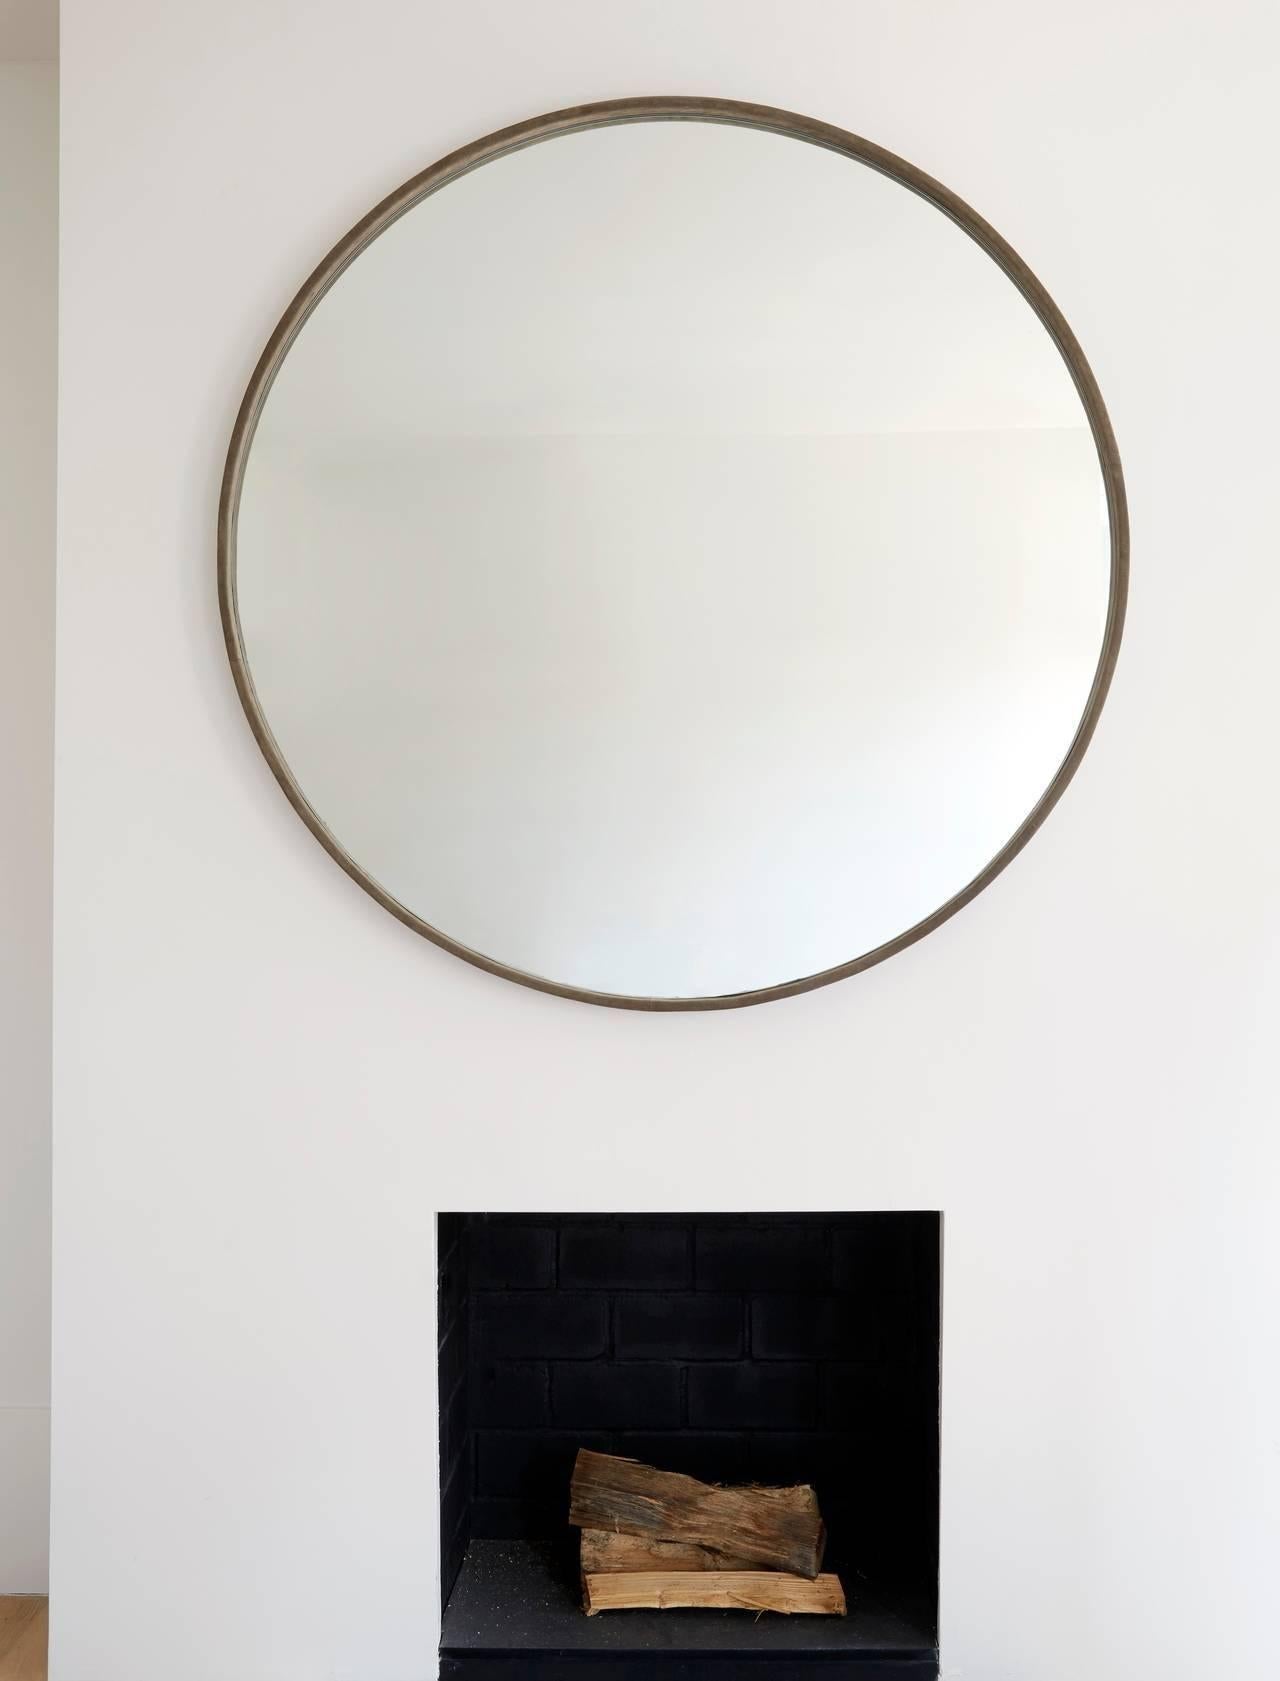 Elegant and simple. Suede mirror with cleat to hang. (Grey pictured)
Measures:
Diameter 48